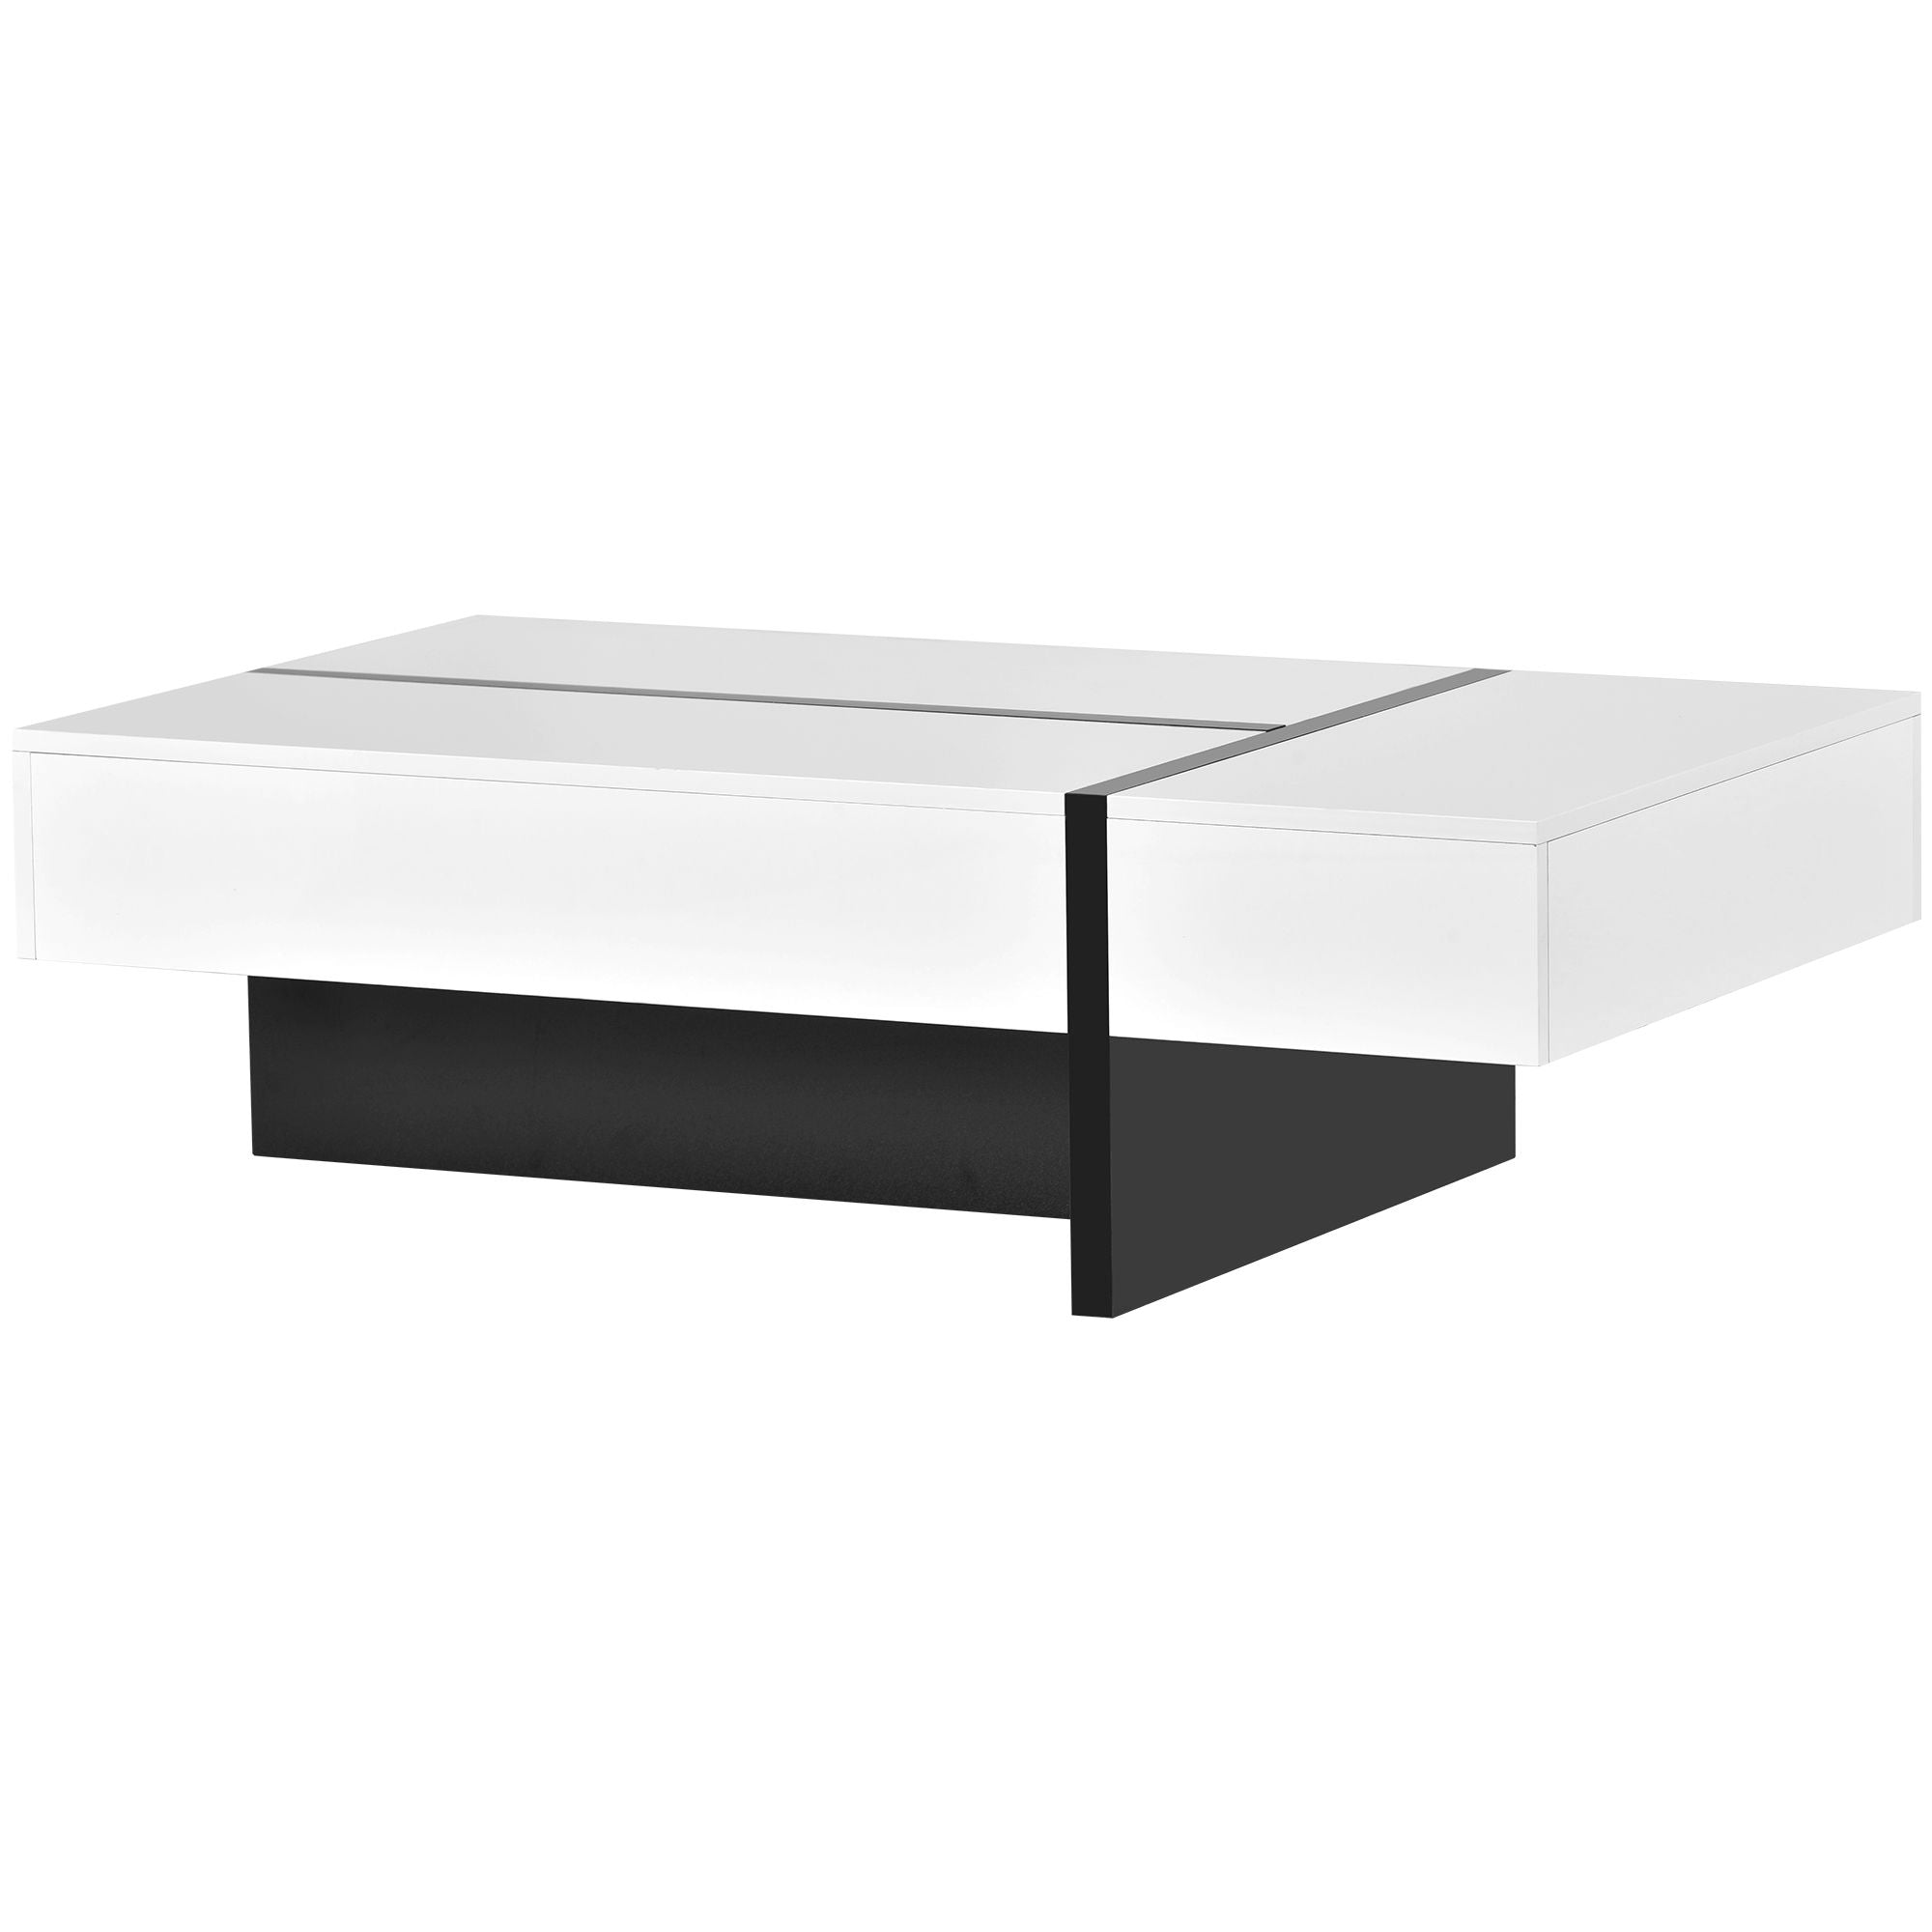 On Trend Contemporary Rectangle Design Living Room Furniture, Modern High Gloss Surface Cocktail Table, Center Table For Sofa Or Upholstered Chairs